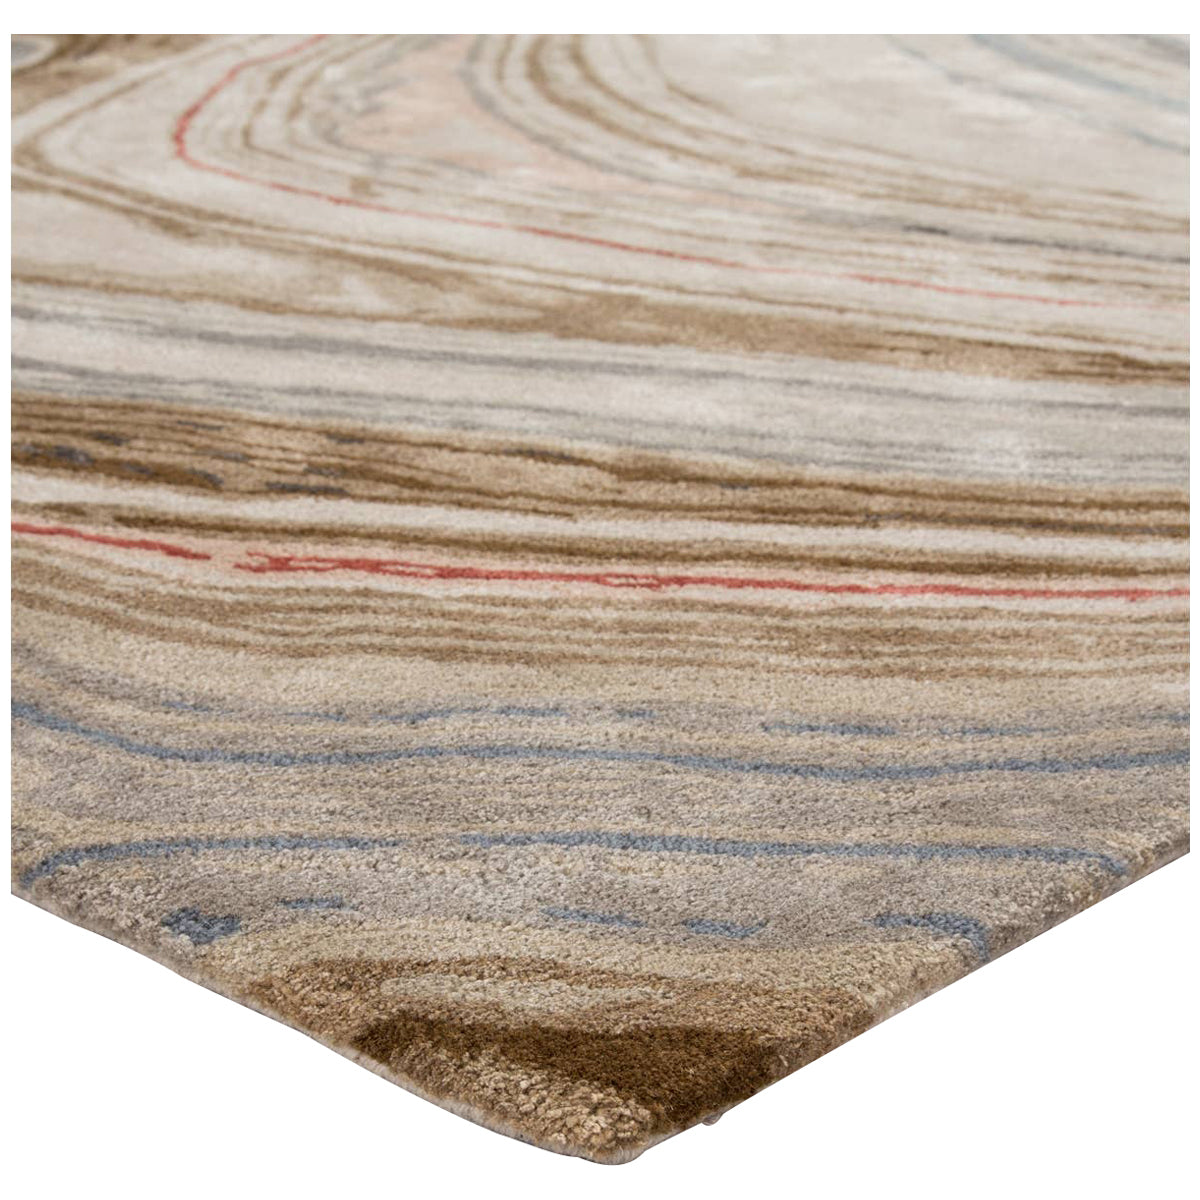 Jaipur Genesis Atha Abstract Brown Red GES31 Area Rug